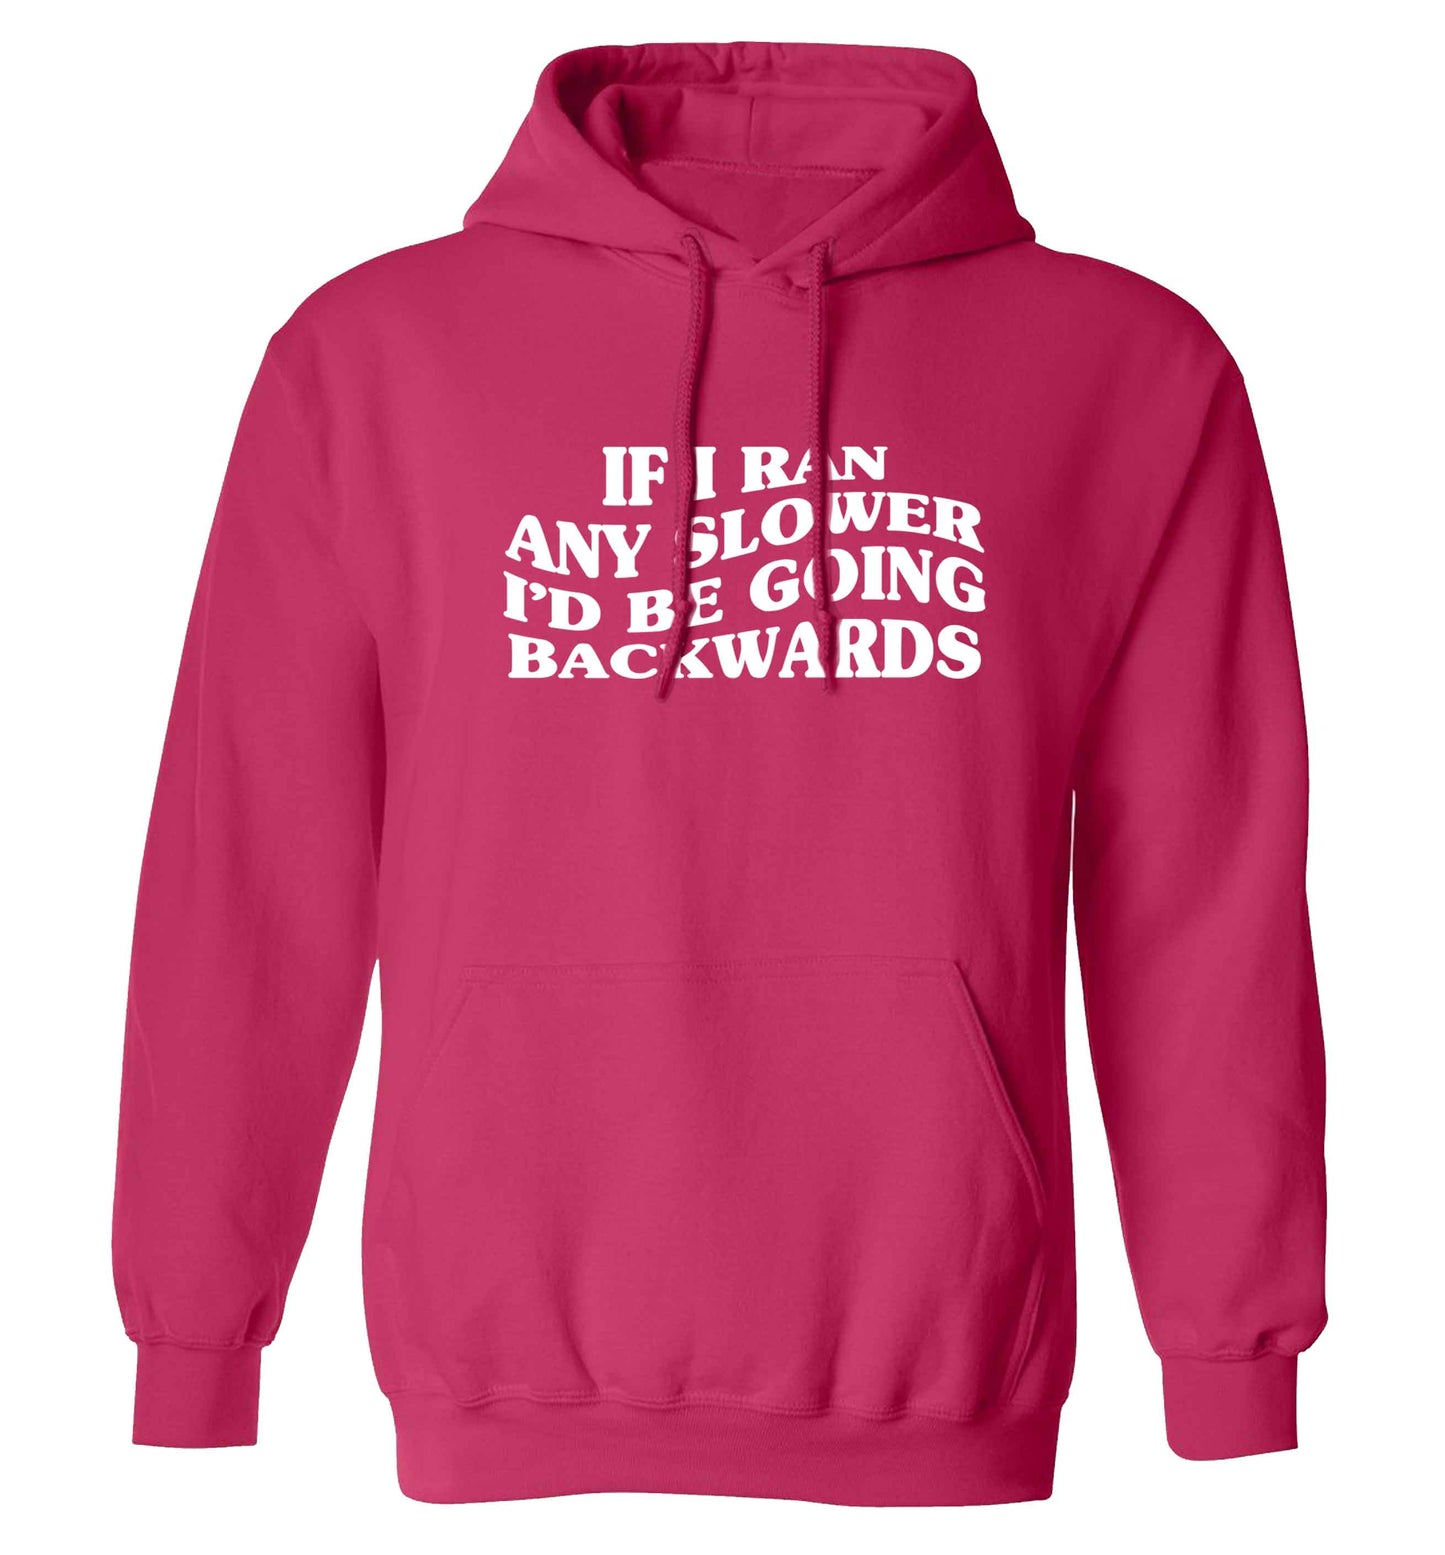 If I ran any slower I'd be going backwards adults unisex pink hoodie 2XL